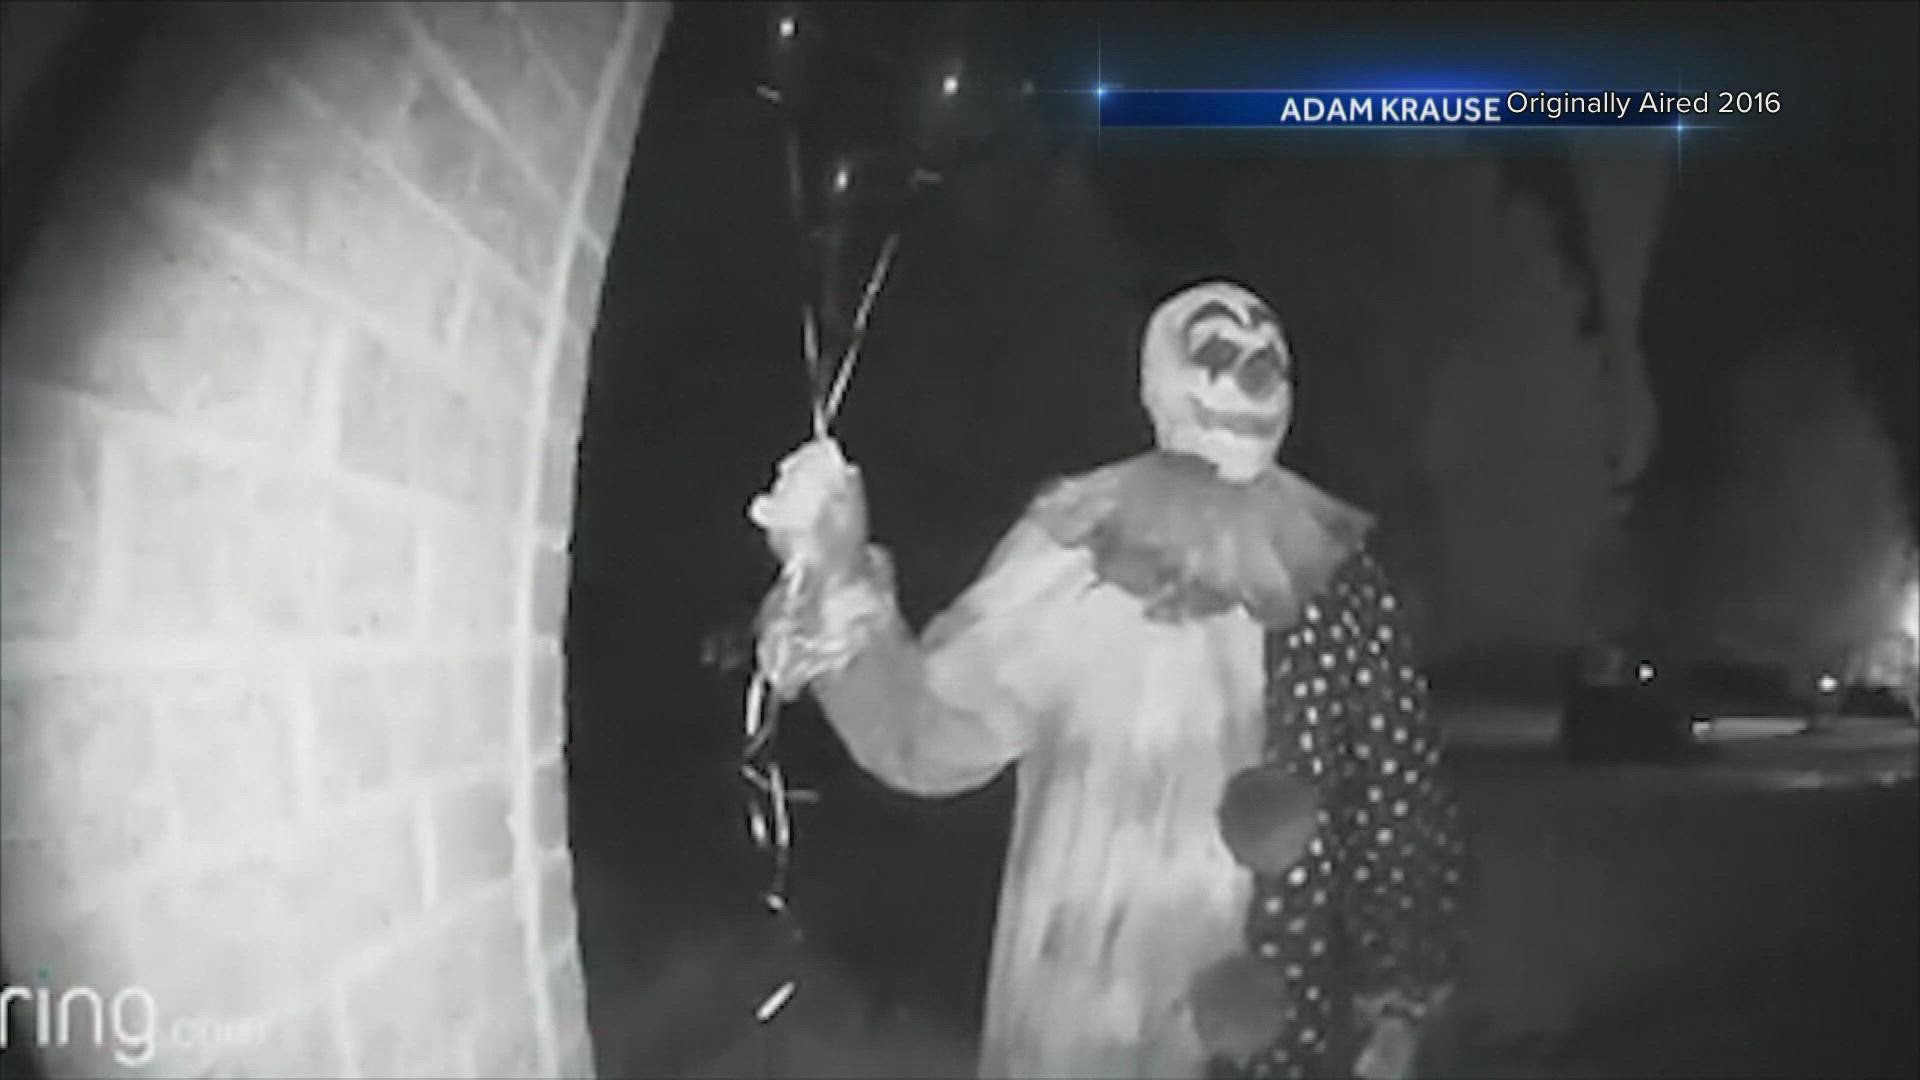 About six years ago, people across the country and right here in Maine reported seeing menacing clowns shortly before Halloween. There was even a riot to hunt them.